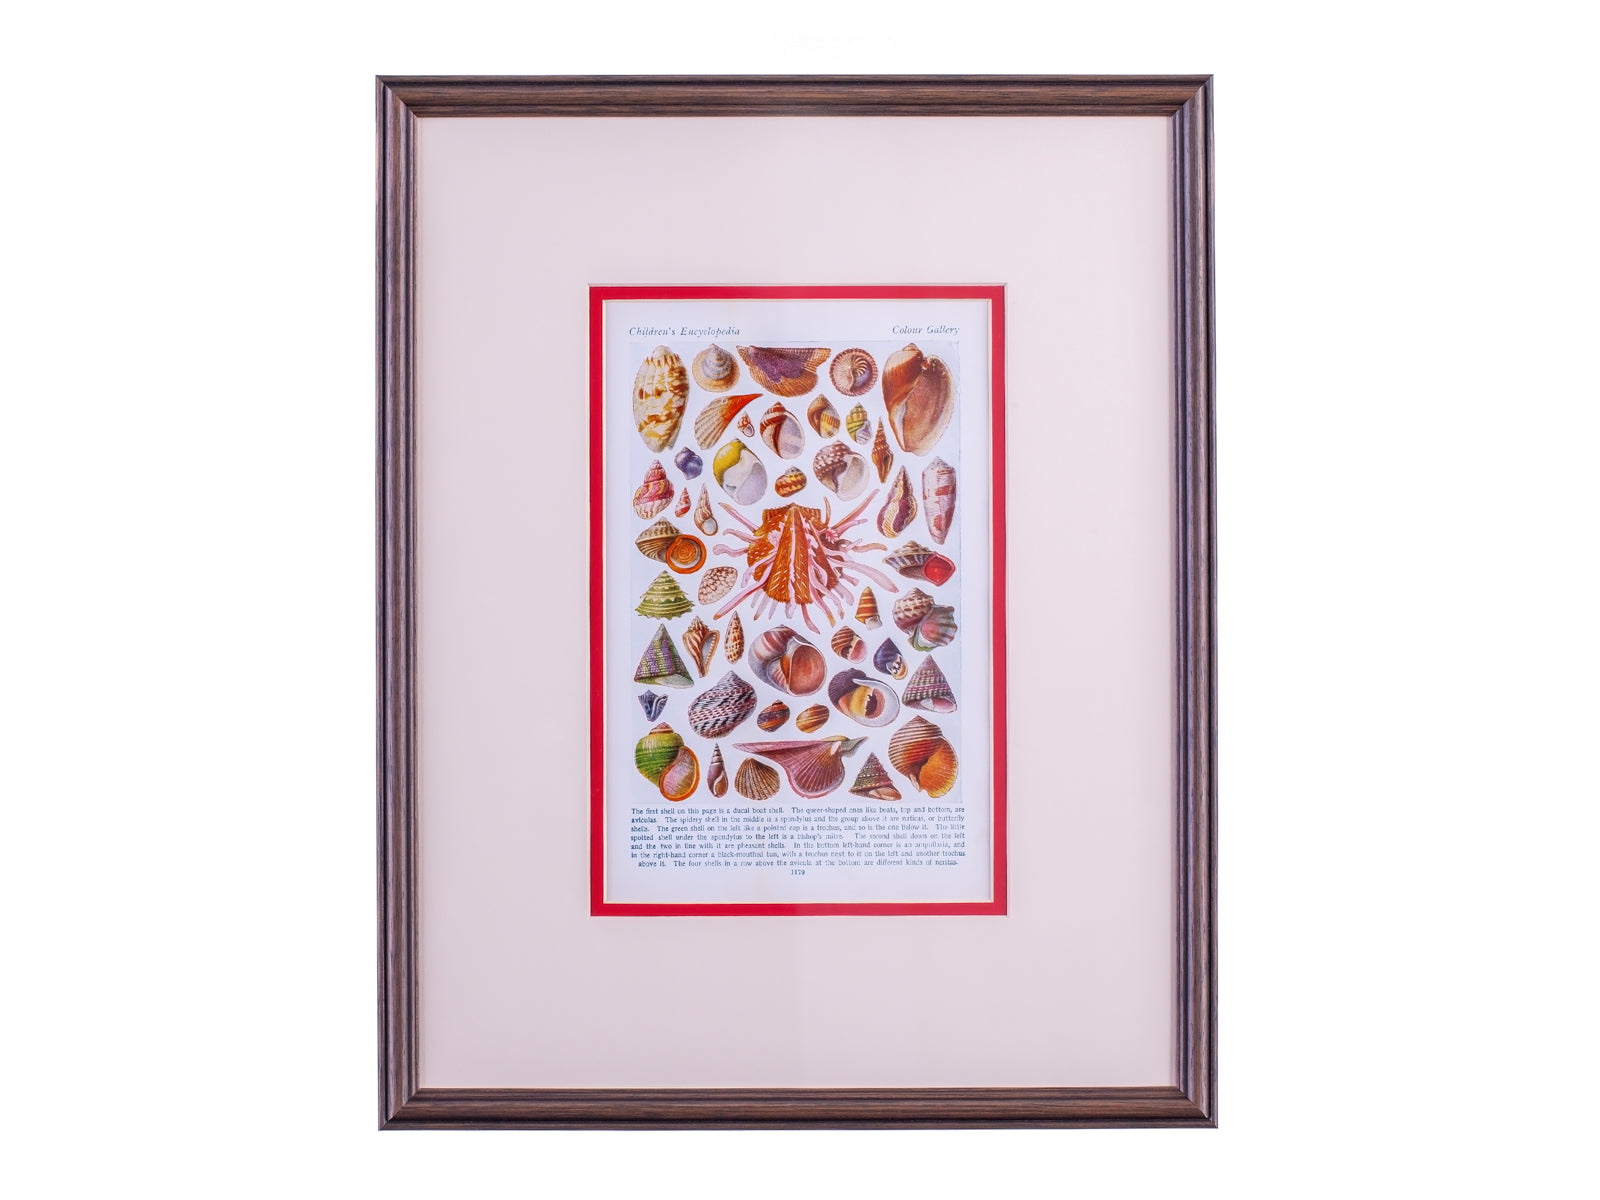 Vintage framed print perfect for a pink aesthetic